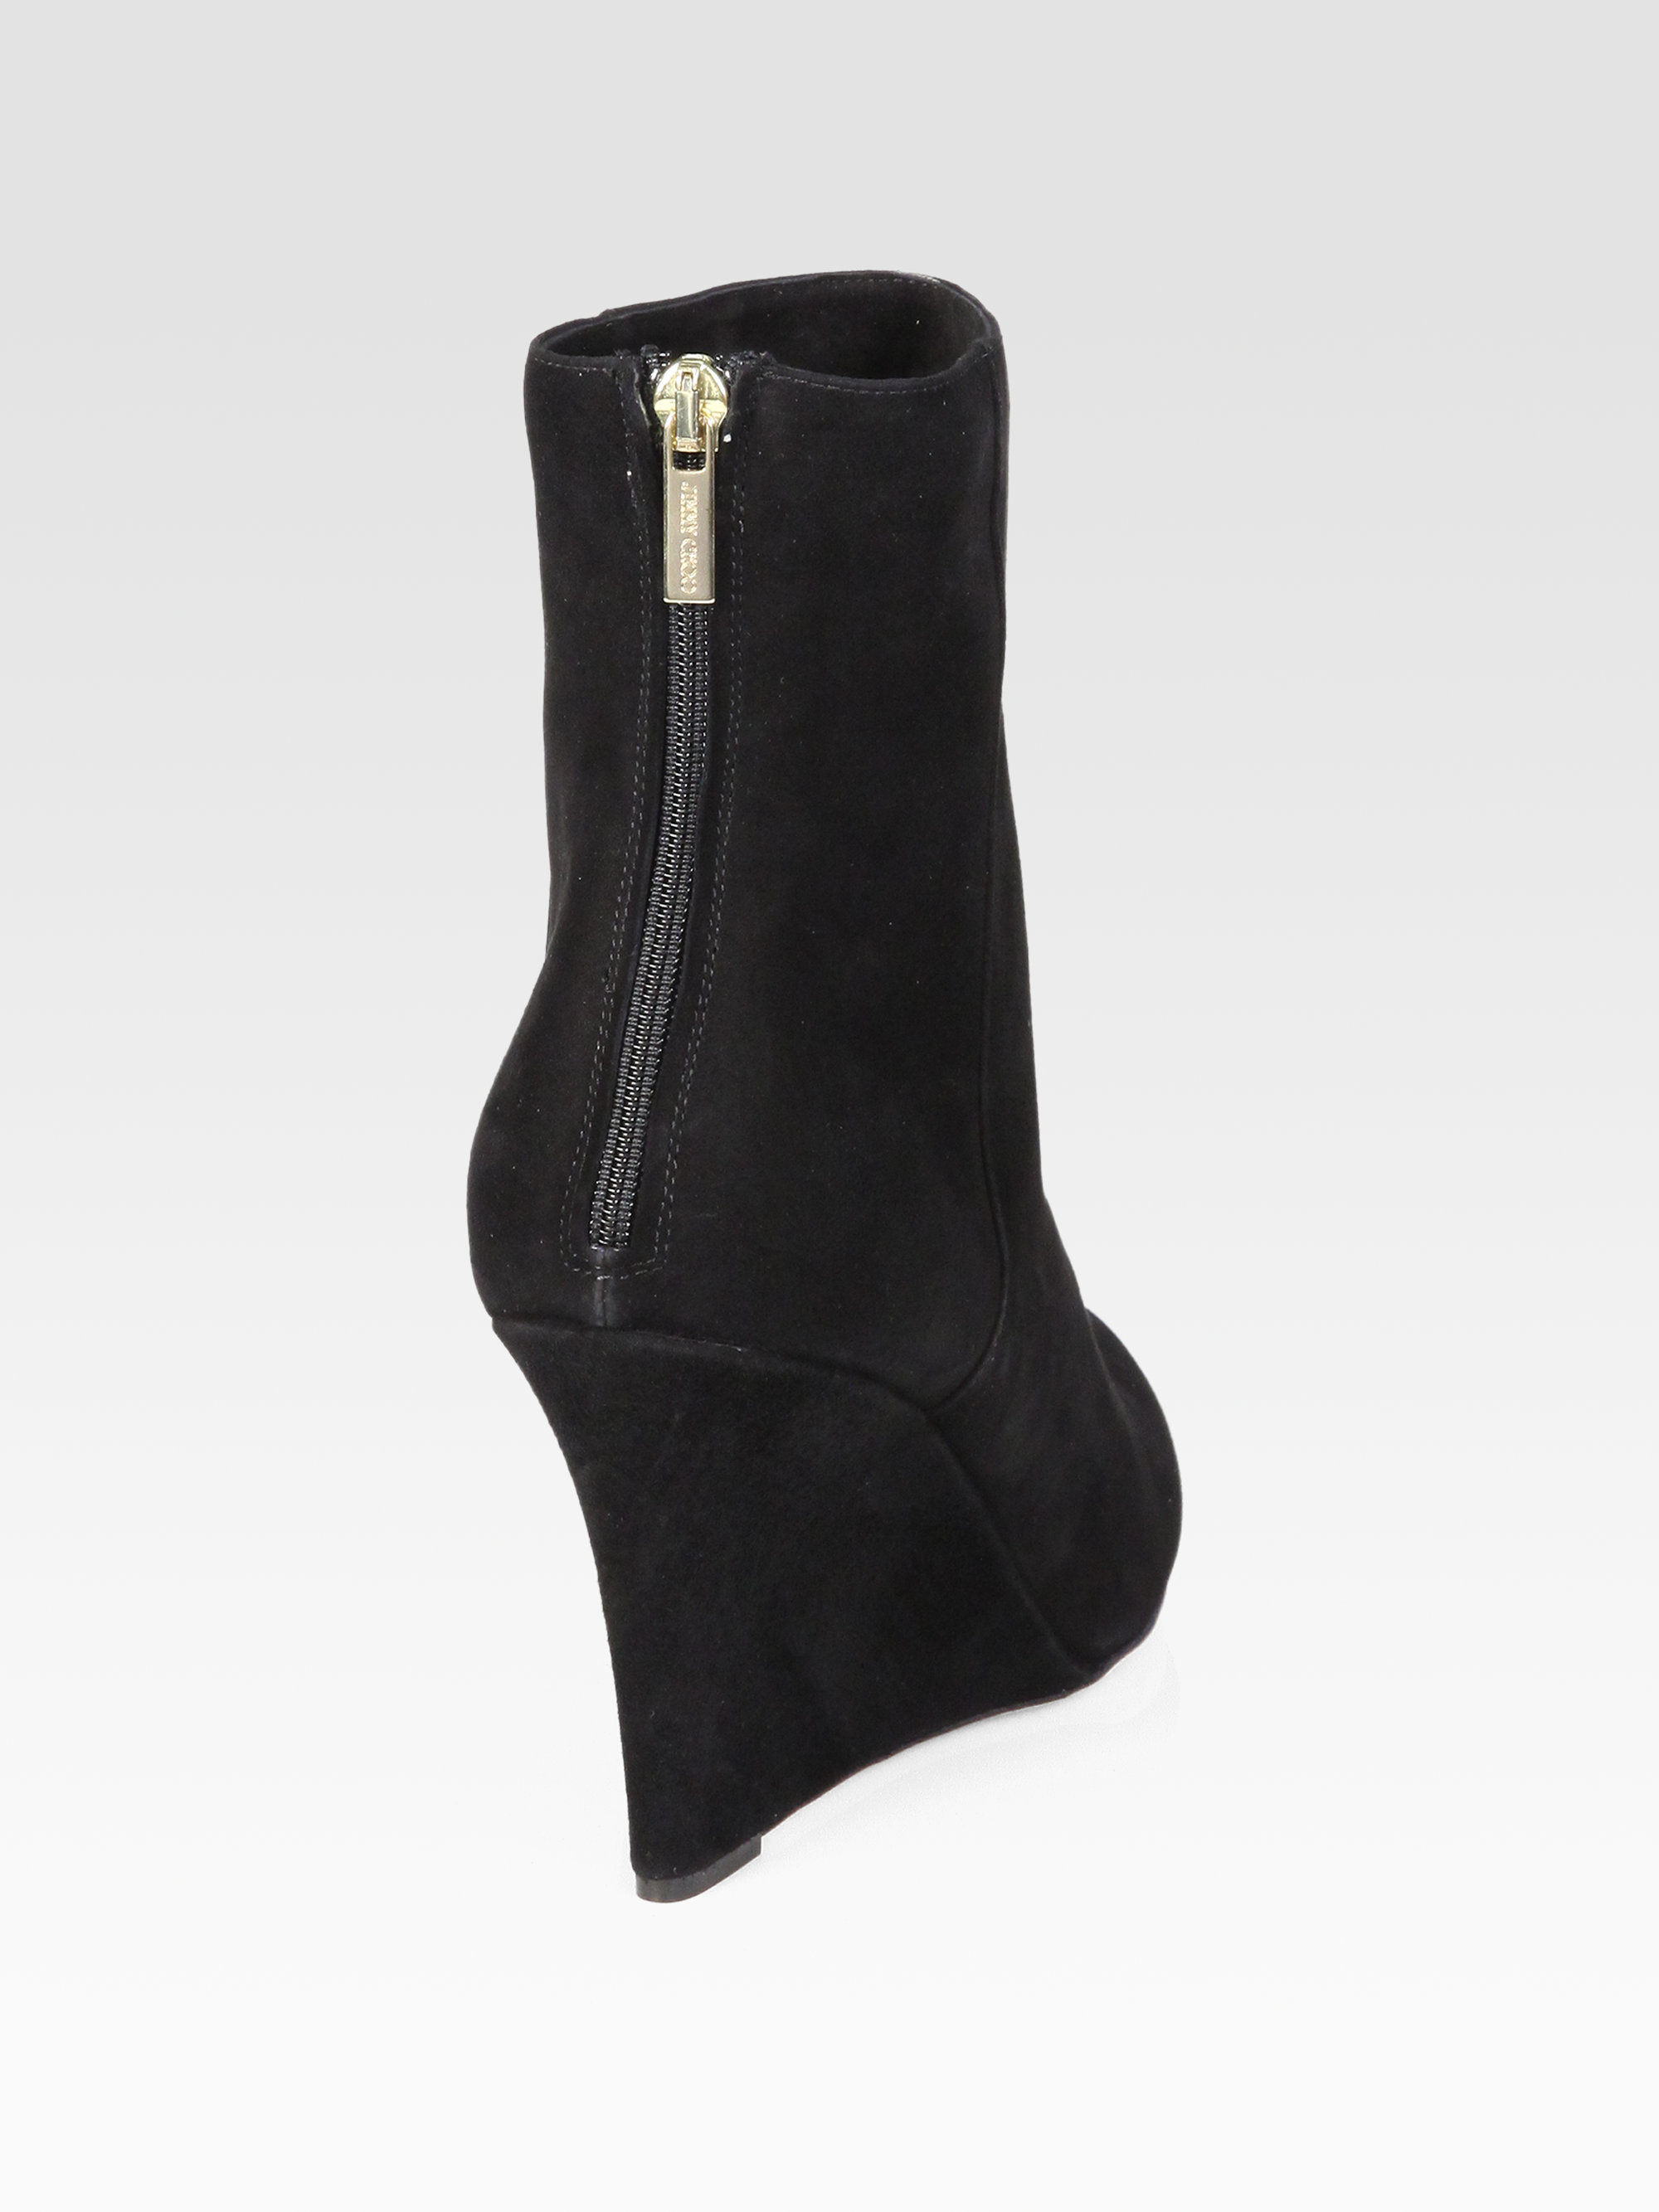 Jimmy choo Mayor Suede Wedge Ankle Boots in Black | Lyst